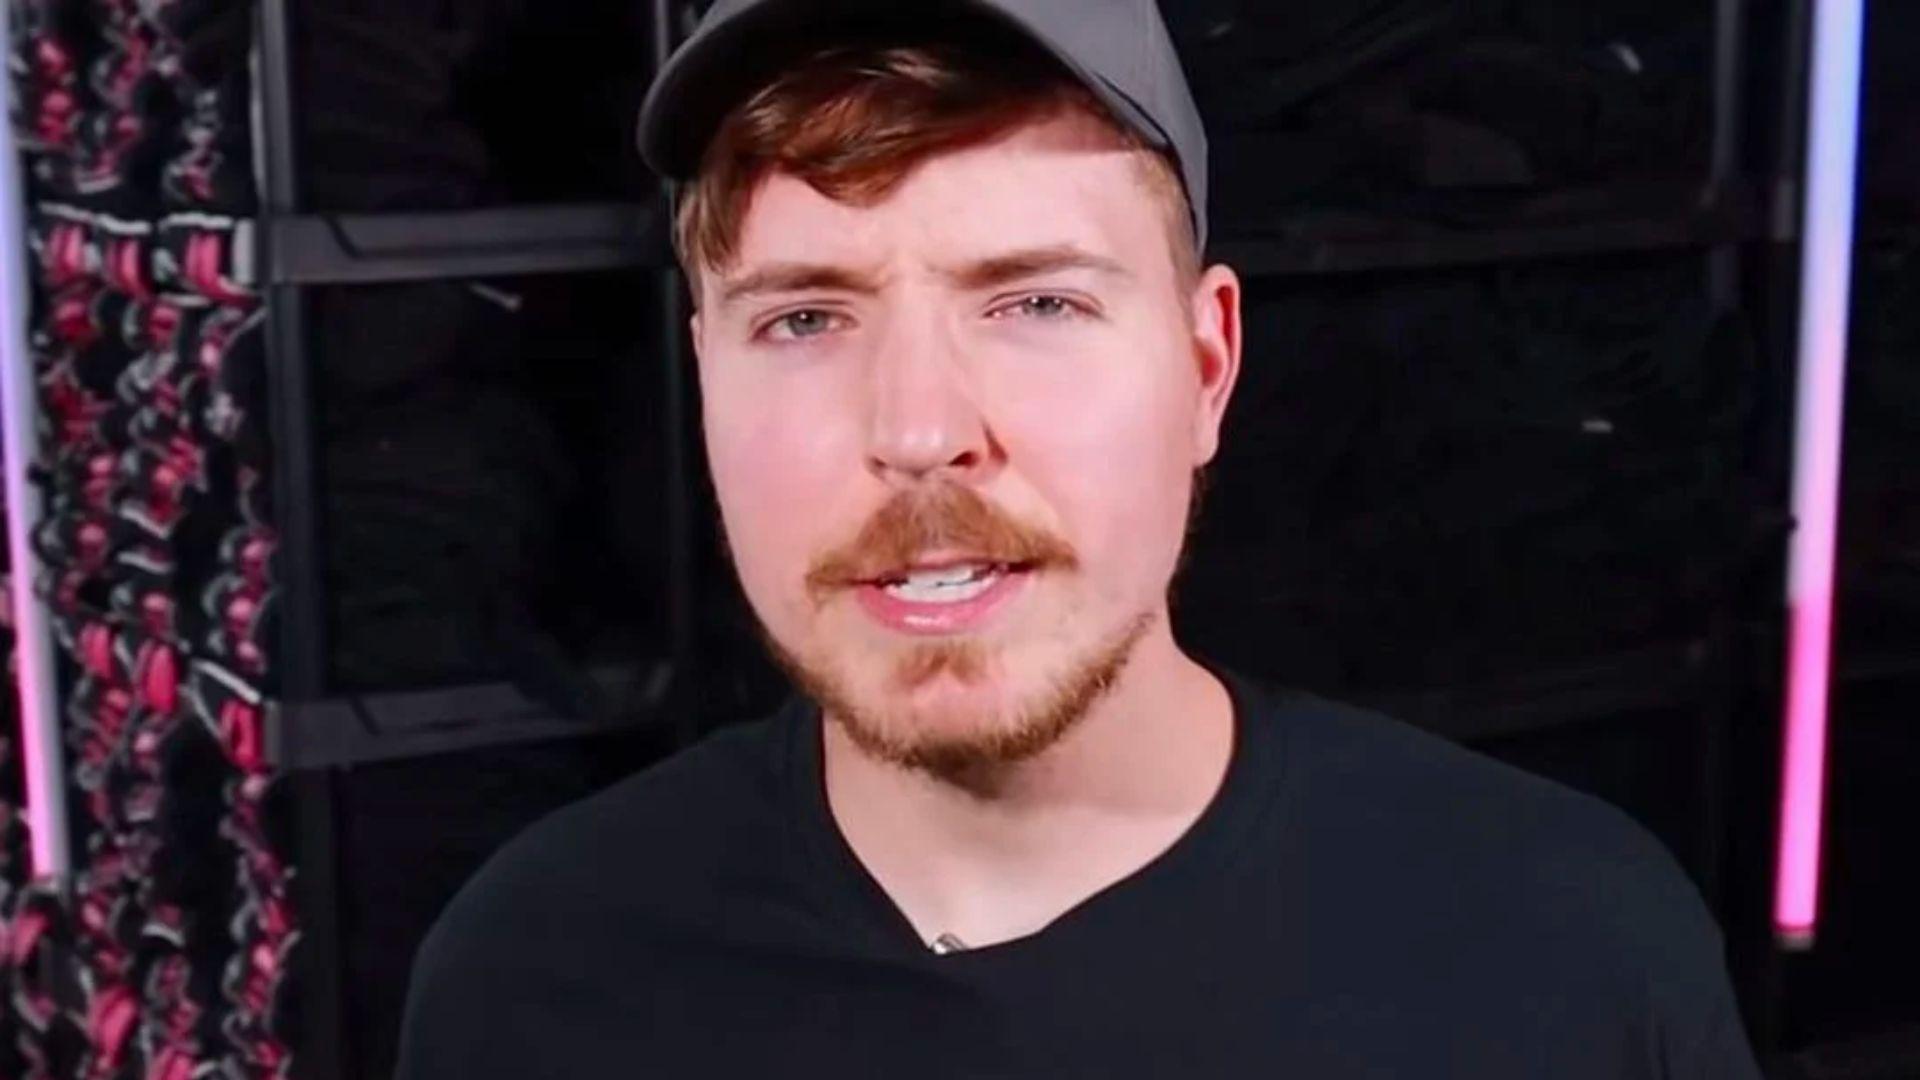 MrBeast in black shirt and grey hat looking at camera with one eye closed